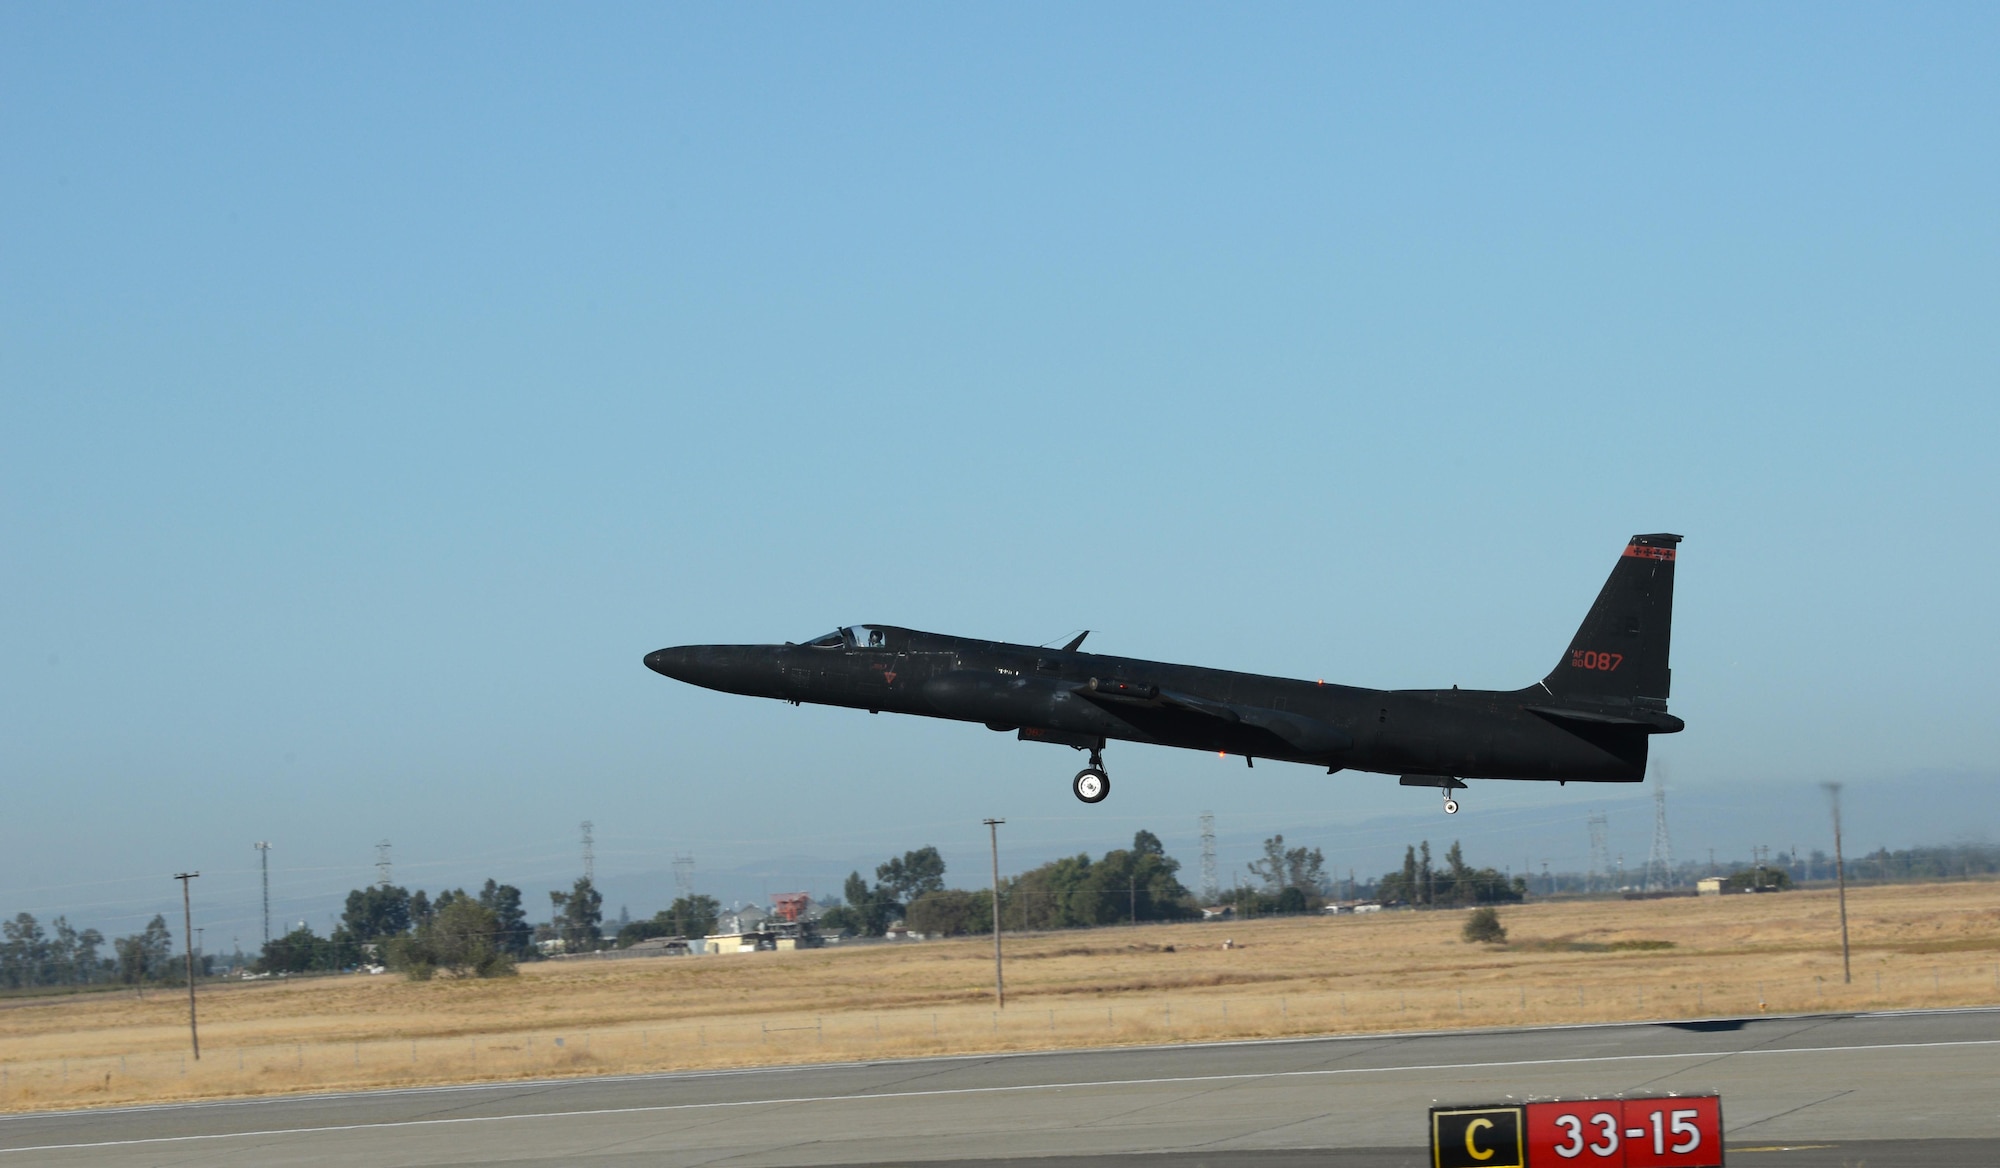 A U-2 Dragon Lady takes off signifying the return to normal flying operations Sept. 23, 2016, at Air Force Base, California after an incident near the Sutter Buttes Sept. 20, 2016. Beale Air Force Base will continue providing high-altitude intelligence, surveillance, and reconnaissance to combatant commanders. (U.S. Air Force photo/Airman Tristan D. Viglianco)